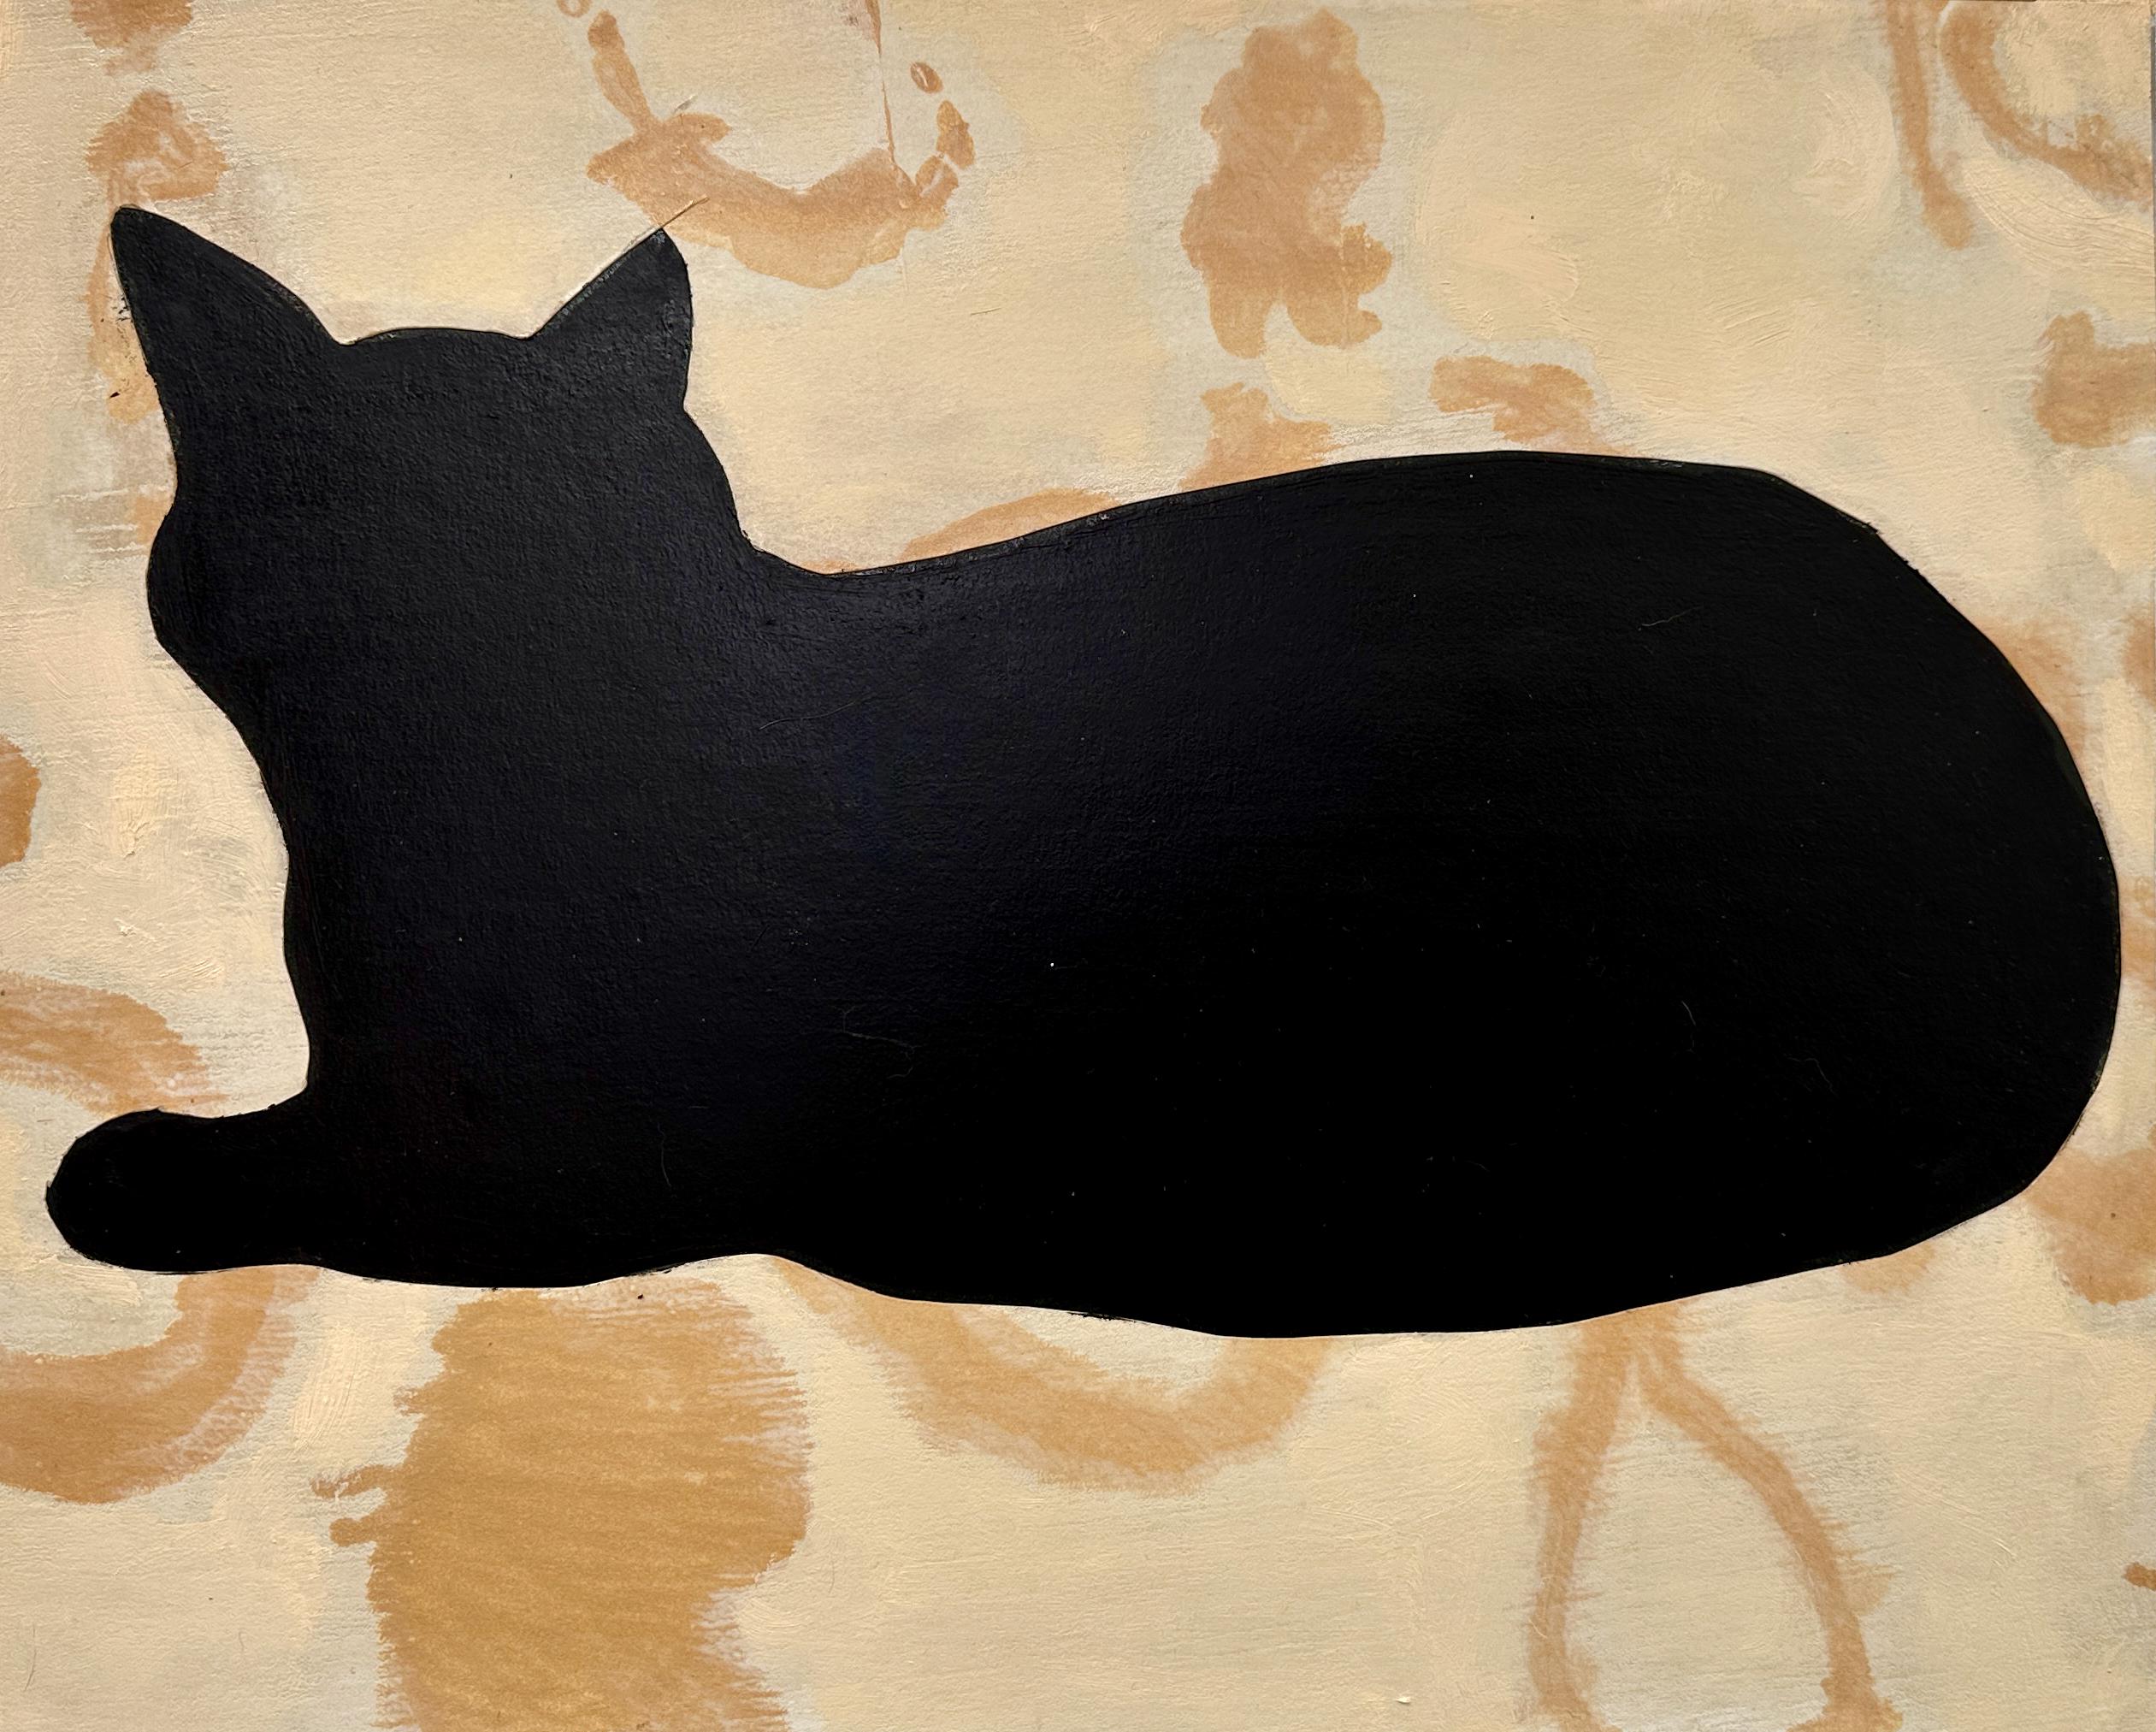 Black Cat (Monotype Collage and Oil Painting of Feline Silhouette on wood Panel)